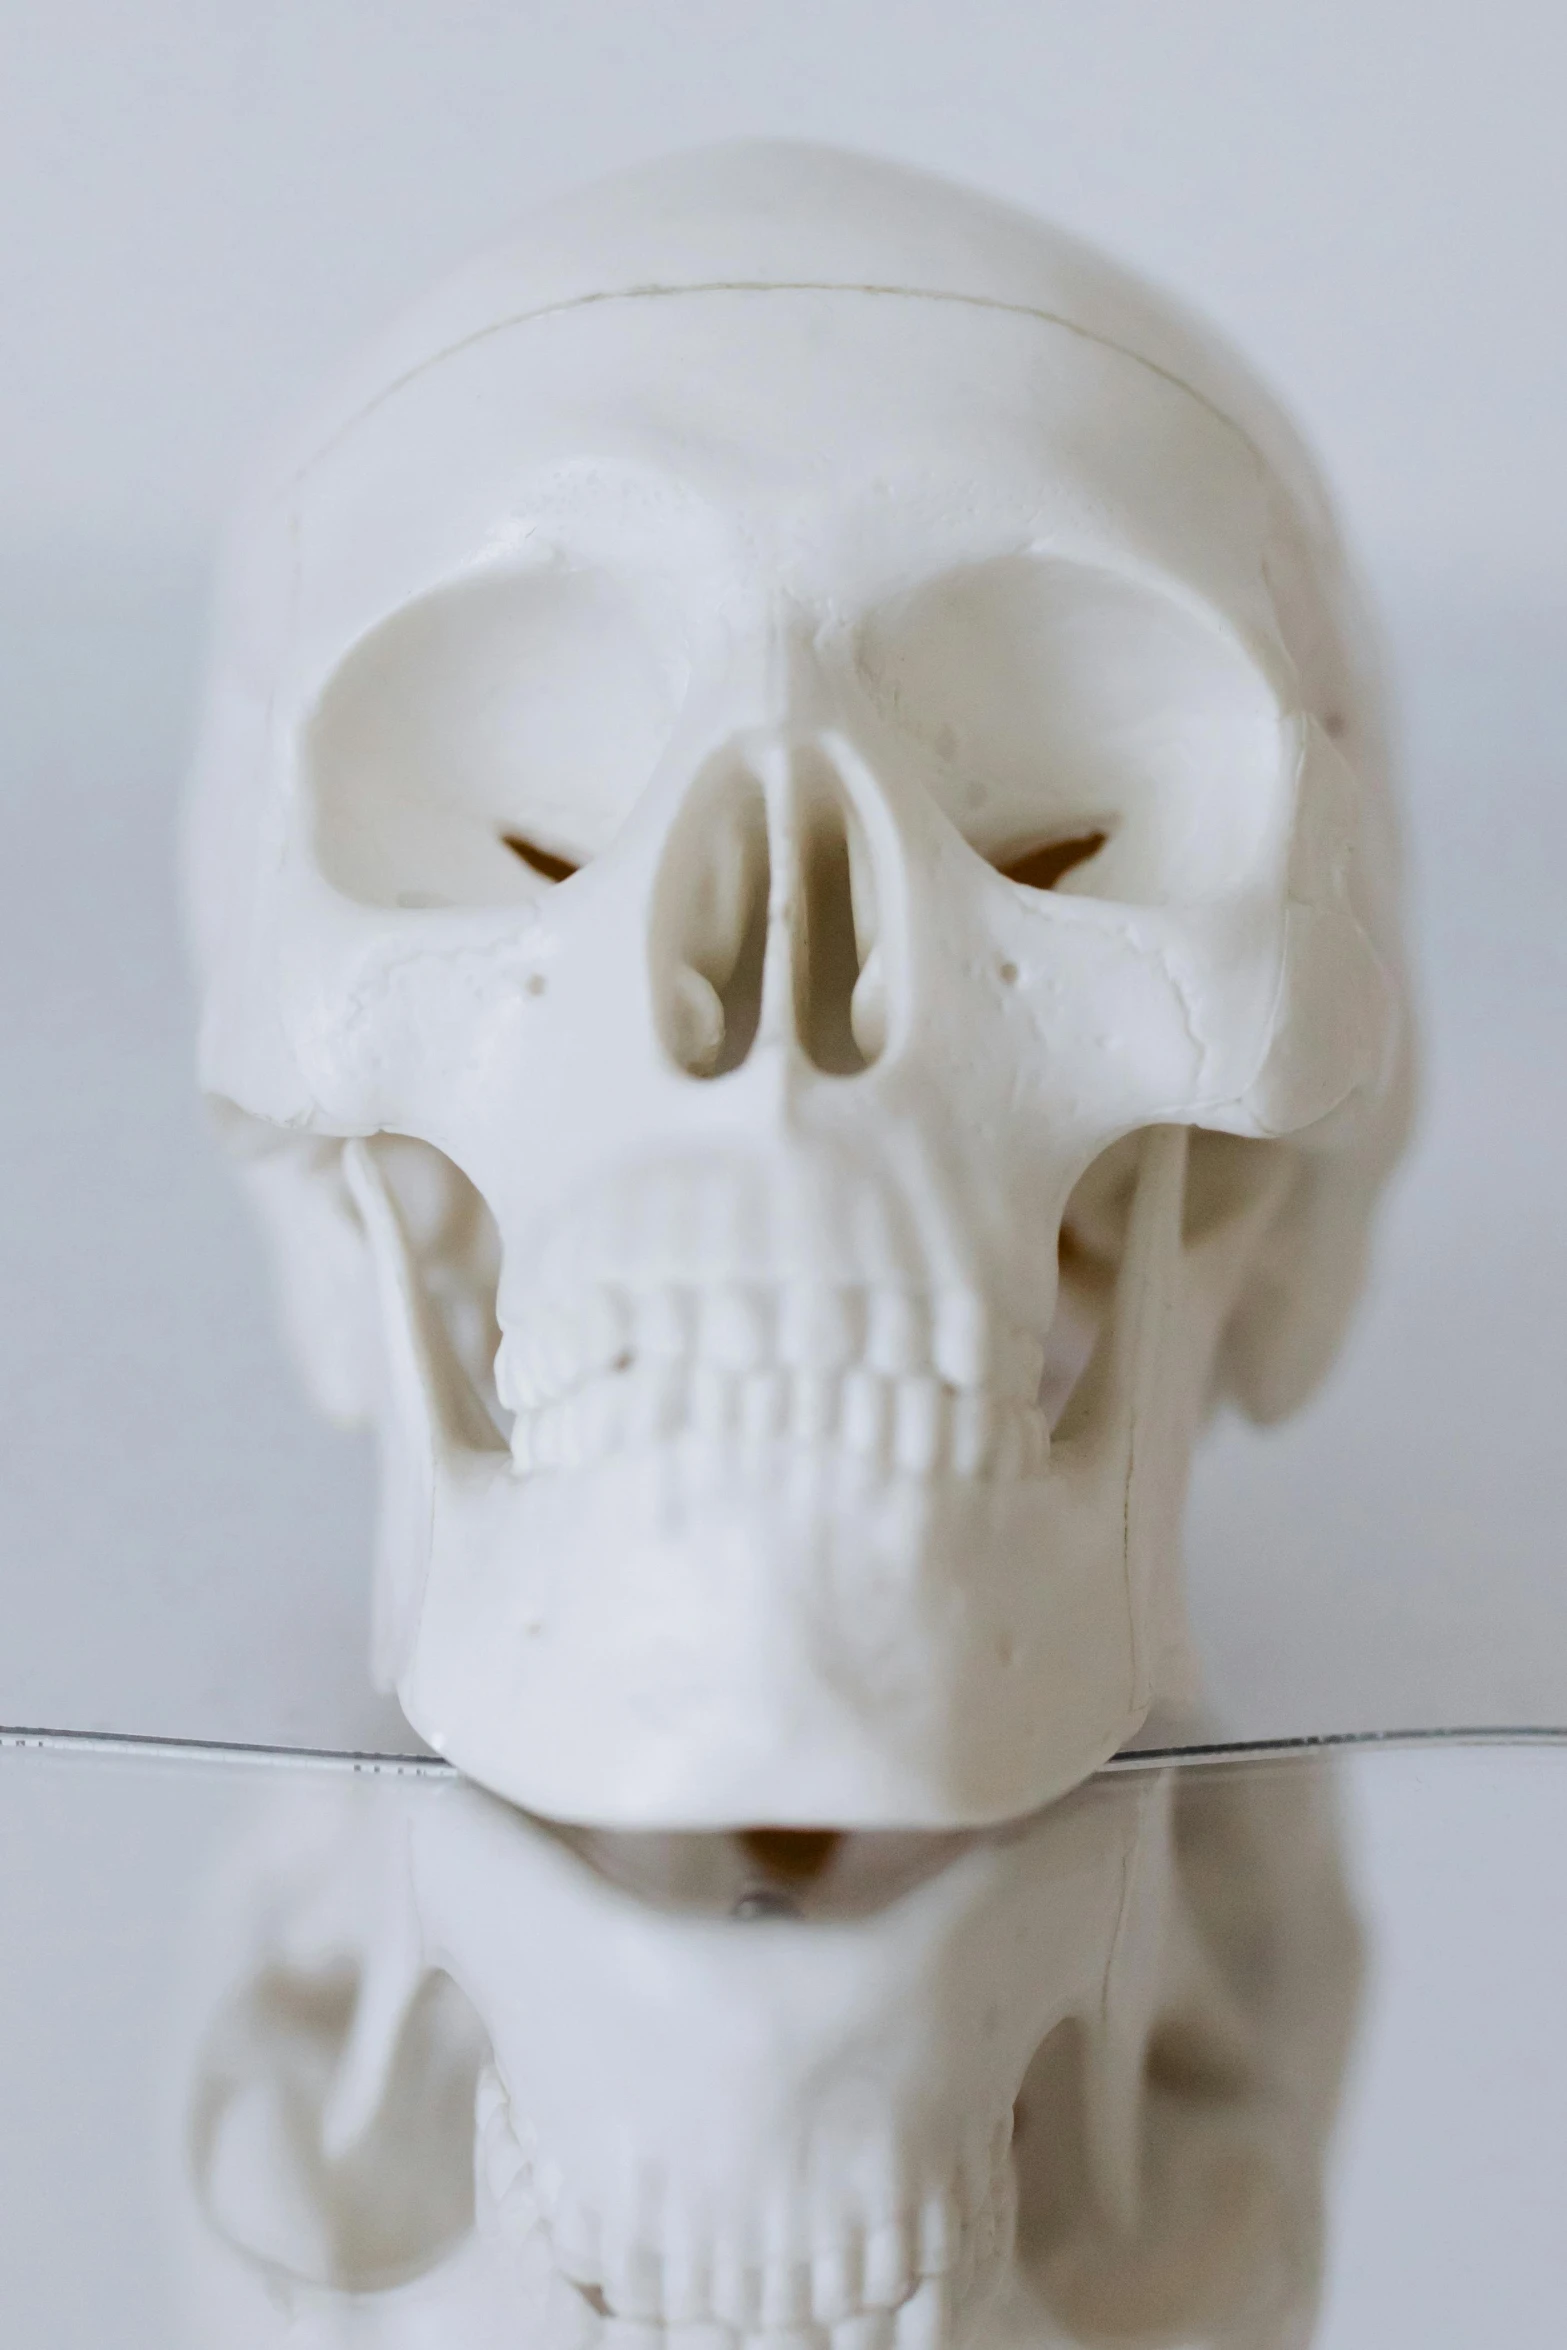 a close up of a skull on a table, porcelain white face, 3d occlusion, most popular, prosthetic